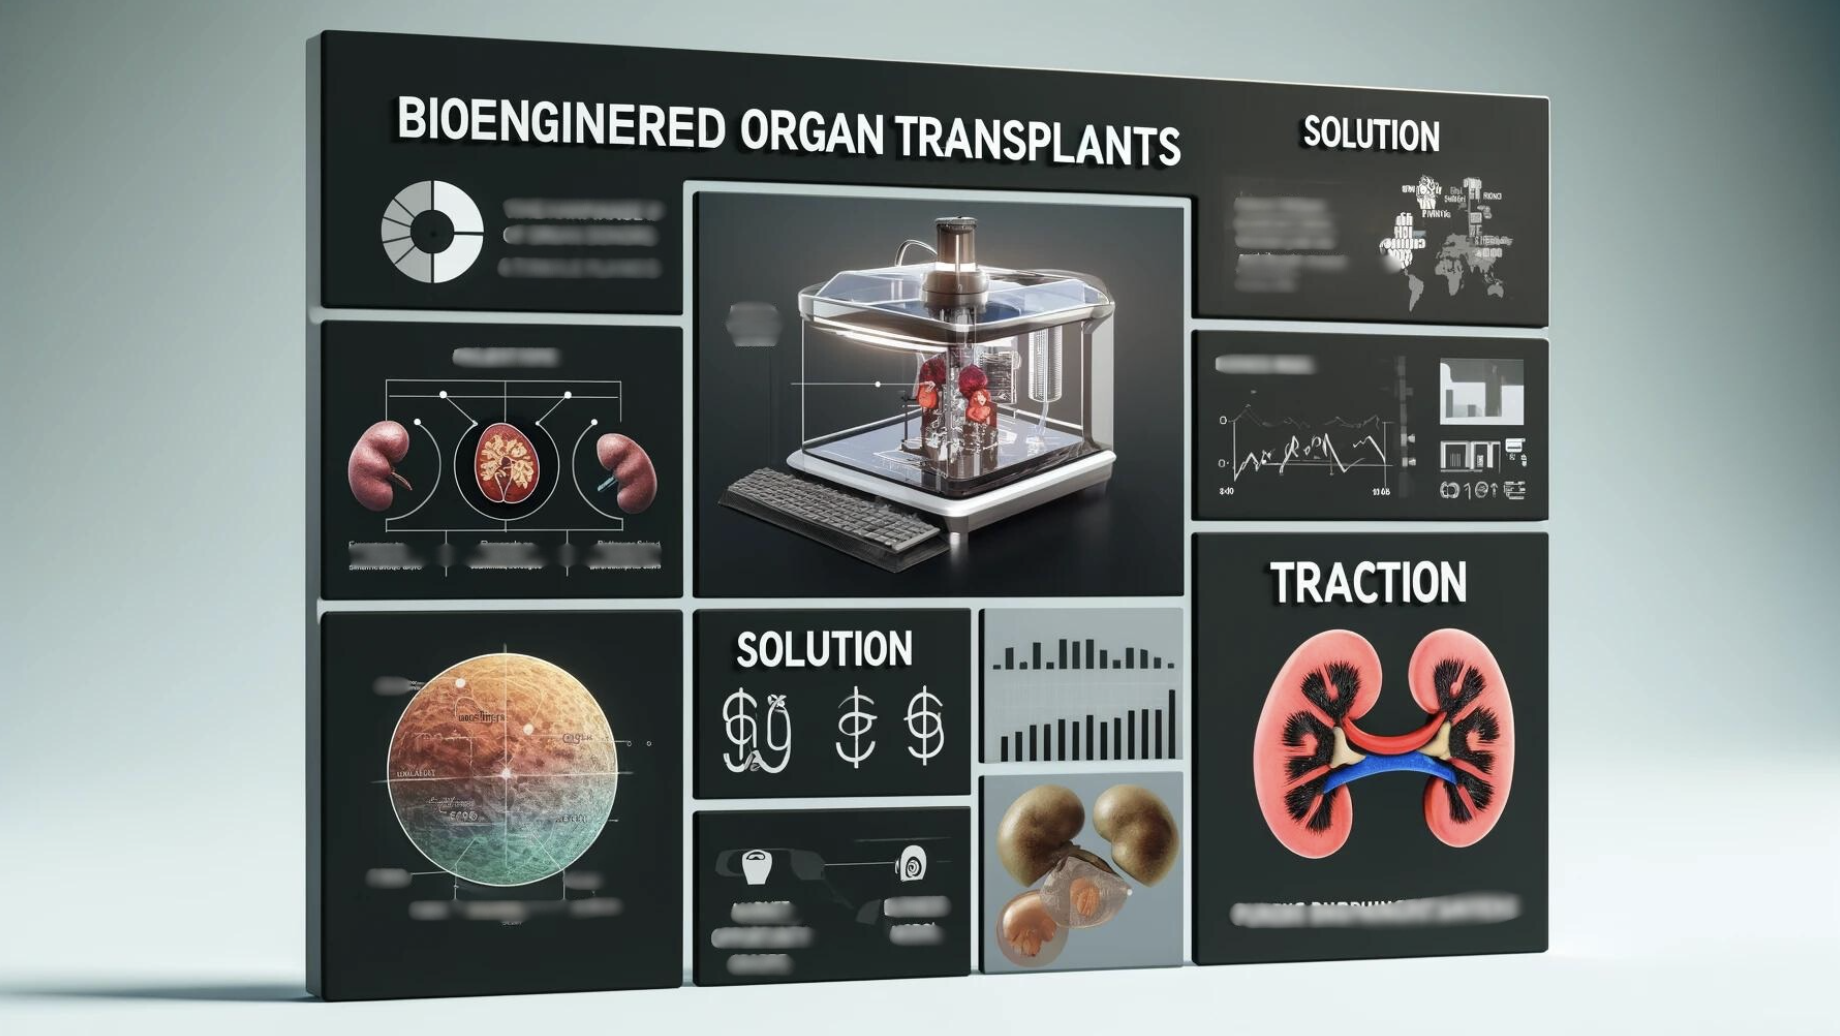 A mock up of the actual deck for the Bioengineered Organ Transplants pitch deck